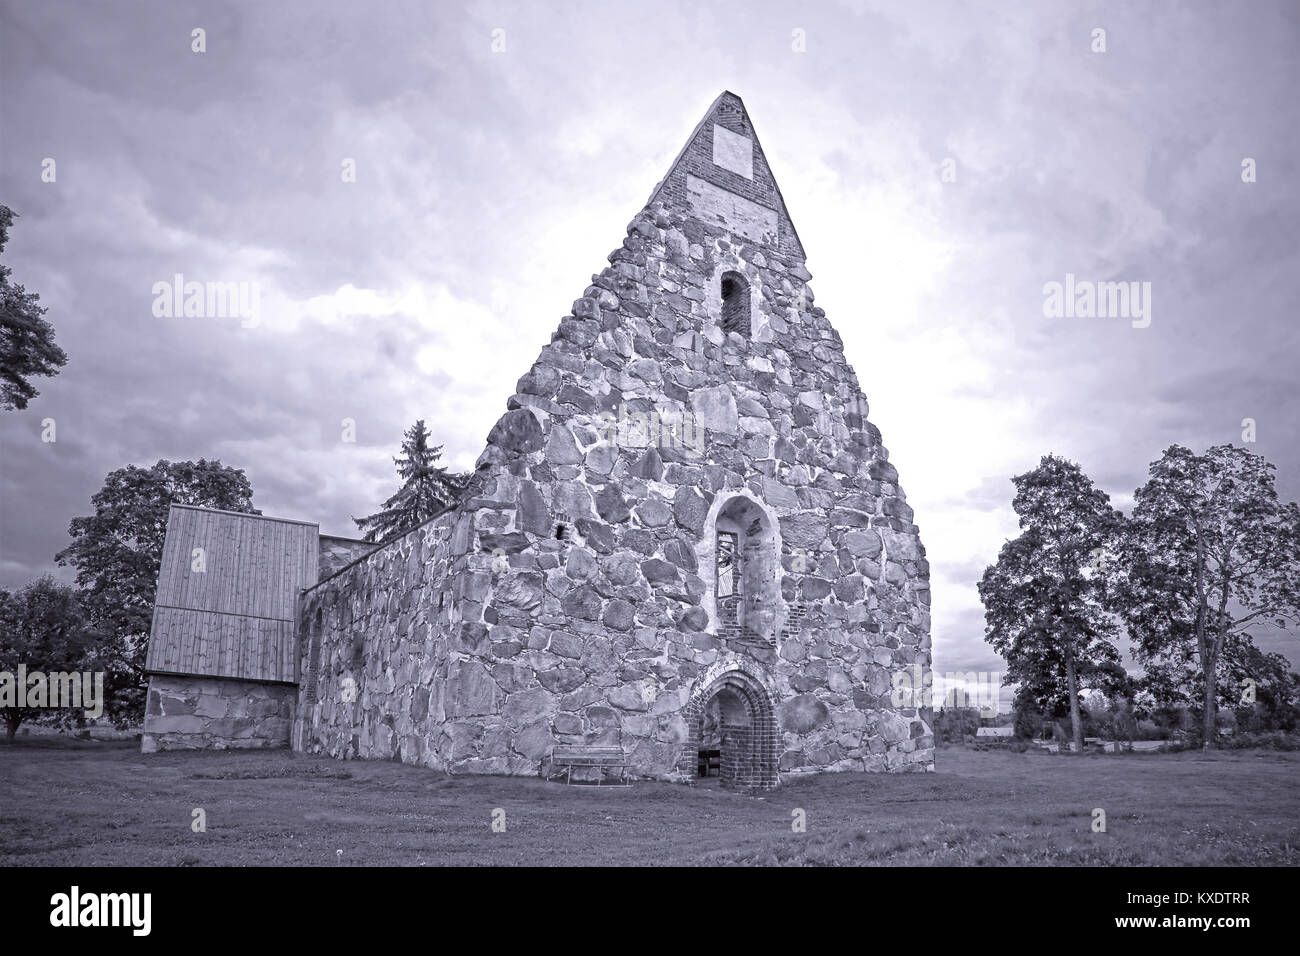 Ruin of old stone church on a cloudy day at summer in Palkane, Finland. Hdr enhanced, in black and white. Stock Photo